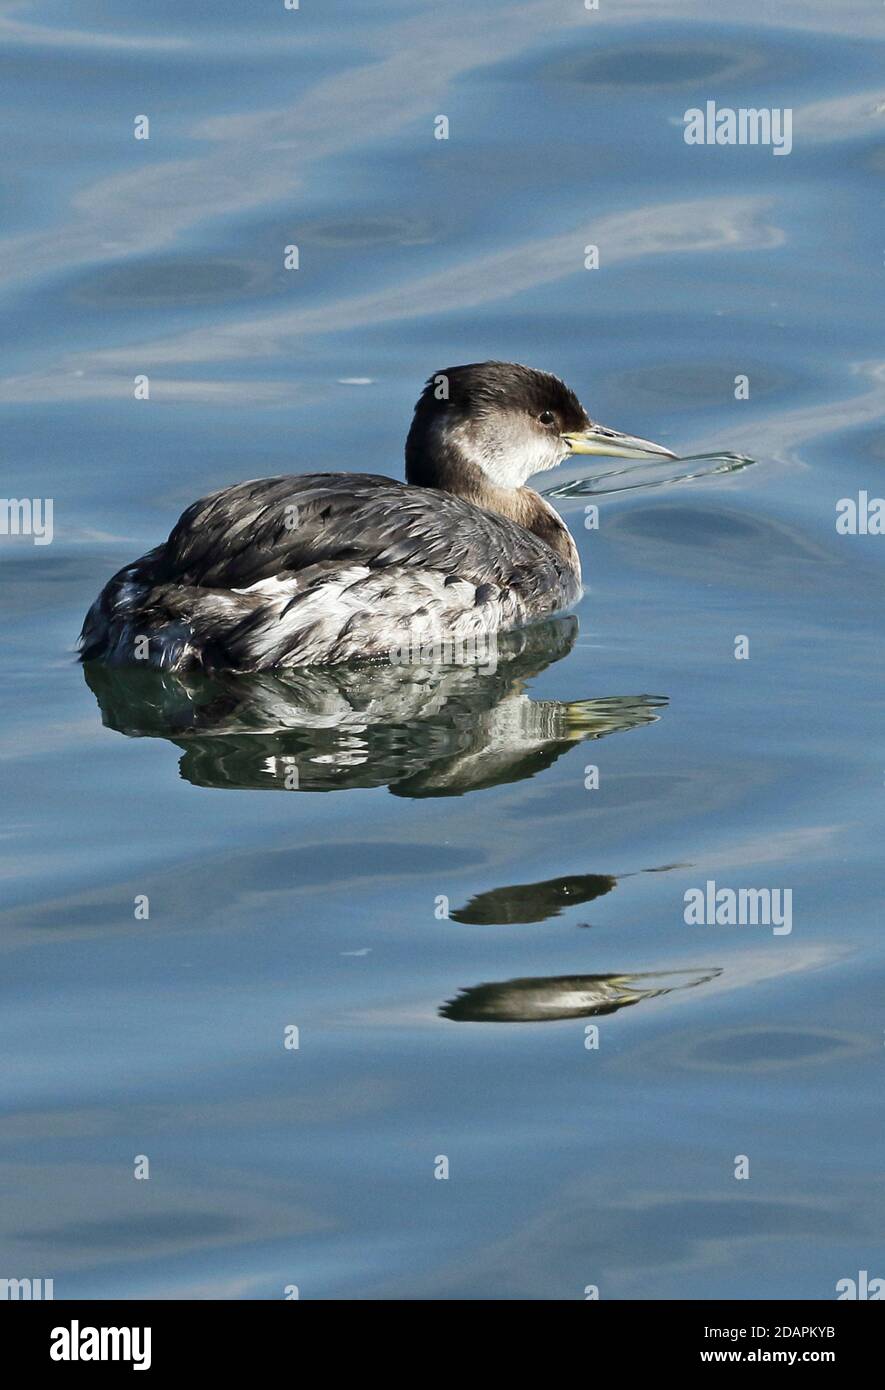 Red-necked Grebe (Podiceps grisegena holbollii) winter plumage adult swimming in harbour  Choshi, Chiba Prefecture, Japan        February Stock Photo